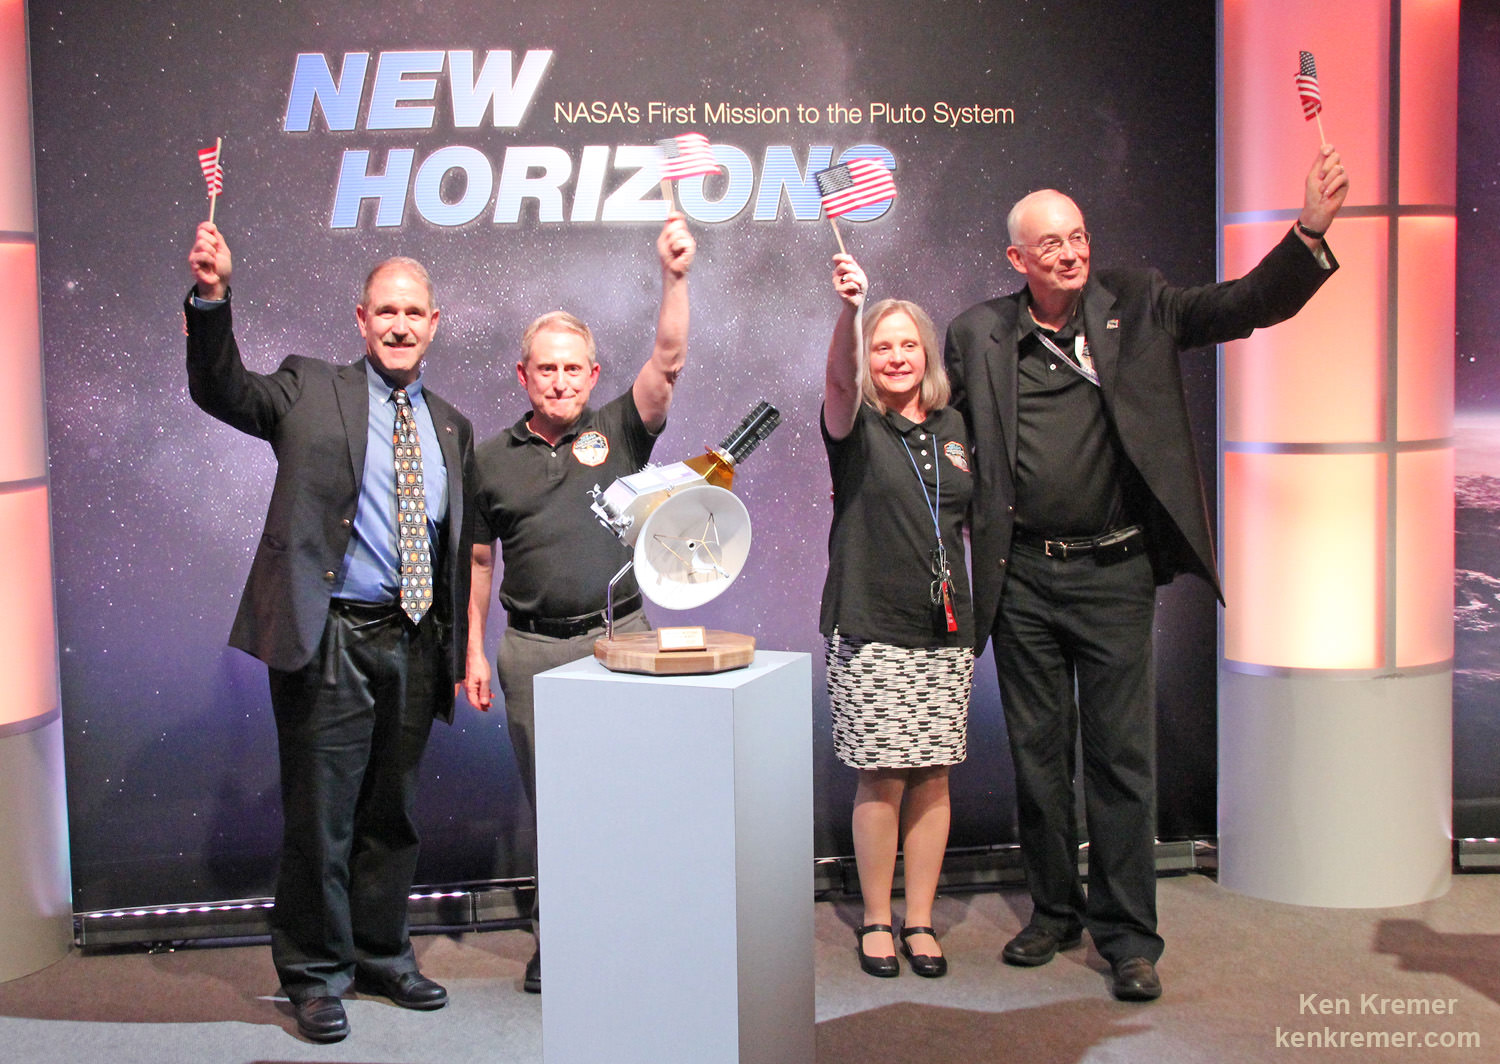 NASA Associate Administrator for the Science Mission Directorate John Grunsfeld, left, New Horizons Principal Investigator Alan Stern of Southwest Research Institute (SwRI), Boulder, CO, second from left, New Horizons Mission Operations Manager Alice Bowman of the Johns Hopkins University Applied Physics Laboratory (APL), second from right, and New Horizons Project Manager Glen Fountain of APL, right, are seen at the conclusion of a press conference after the team received confirmation from the spacecraft that it has completed the flyby of Pluto, Tuesday, July 14, 2015 at the Johns Hopkins University Applied Physics Laboratory (APL) in Laurel, Maryland. Credit:  Ken Kremer/kenkremer.com